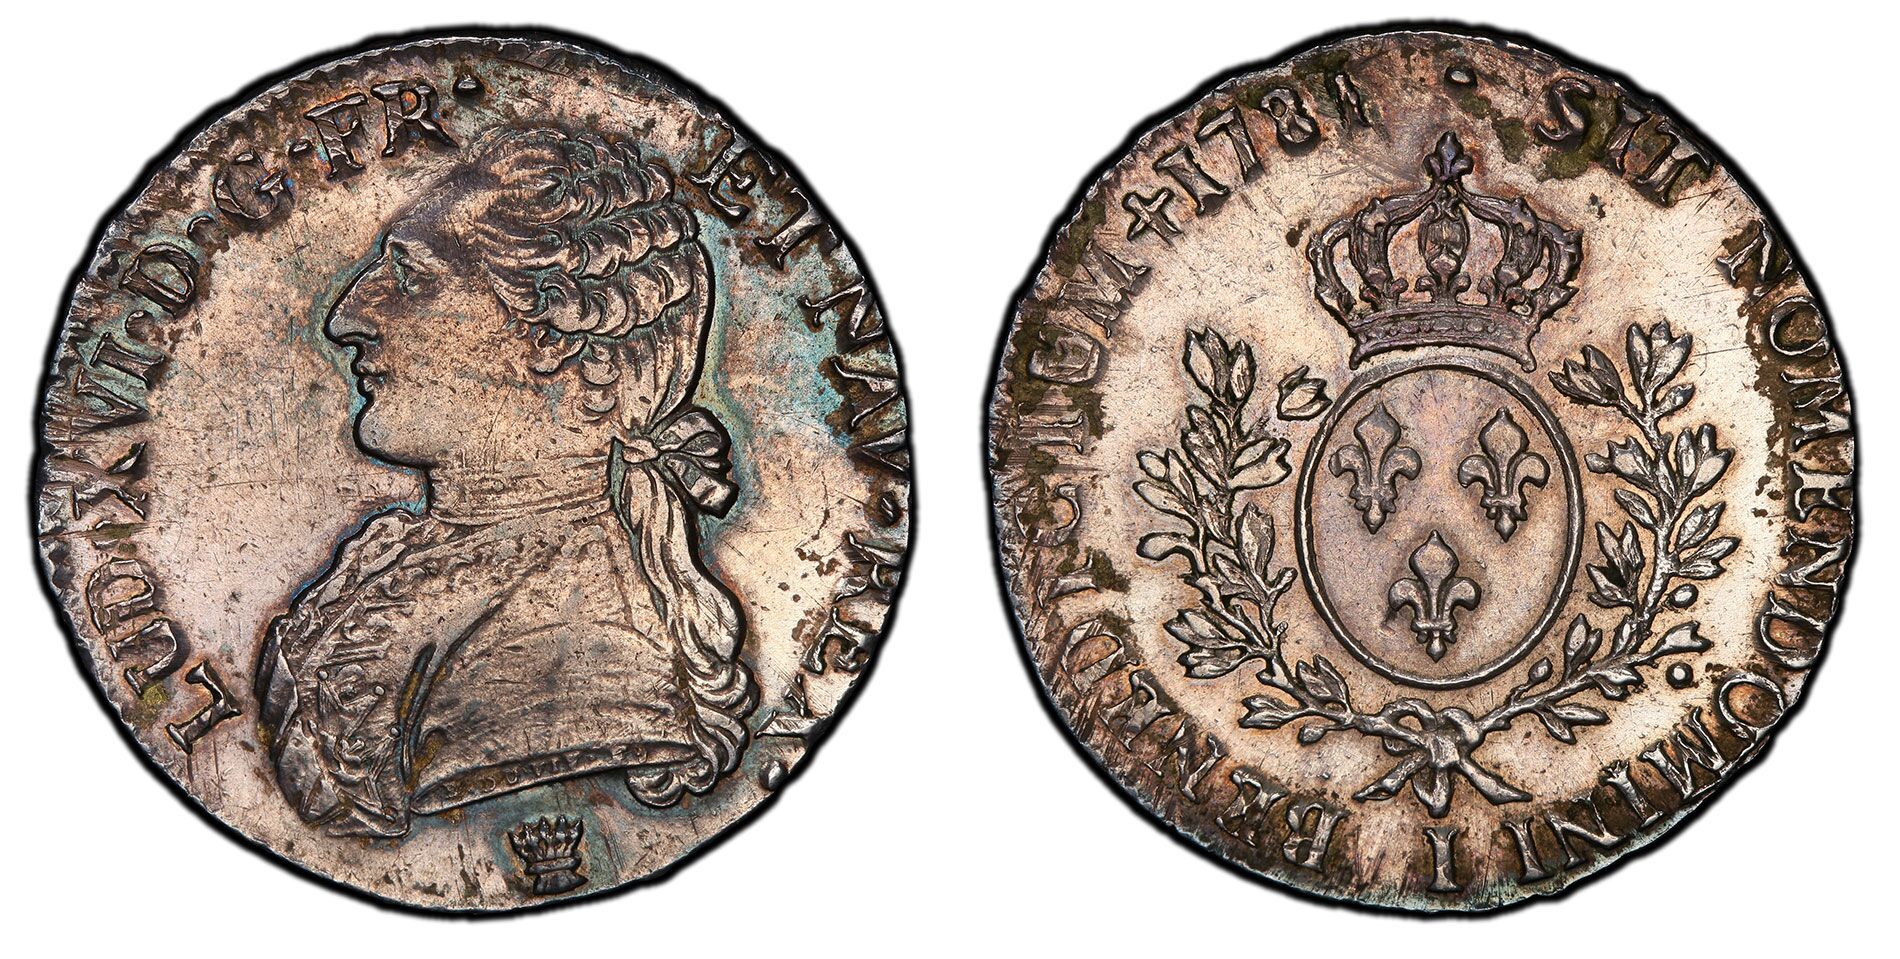 France “1781” Ecu with Altered Date. Images courtesy PCGS